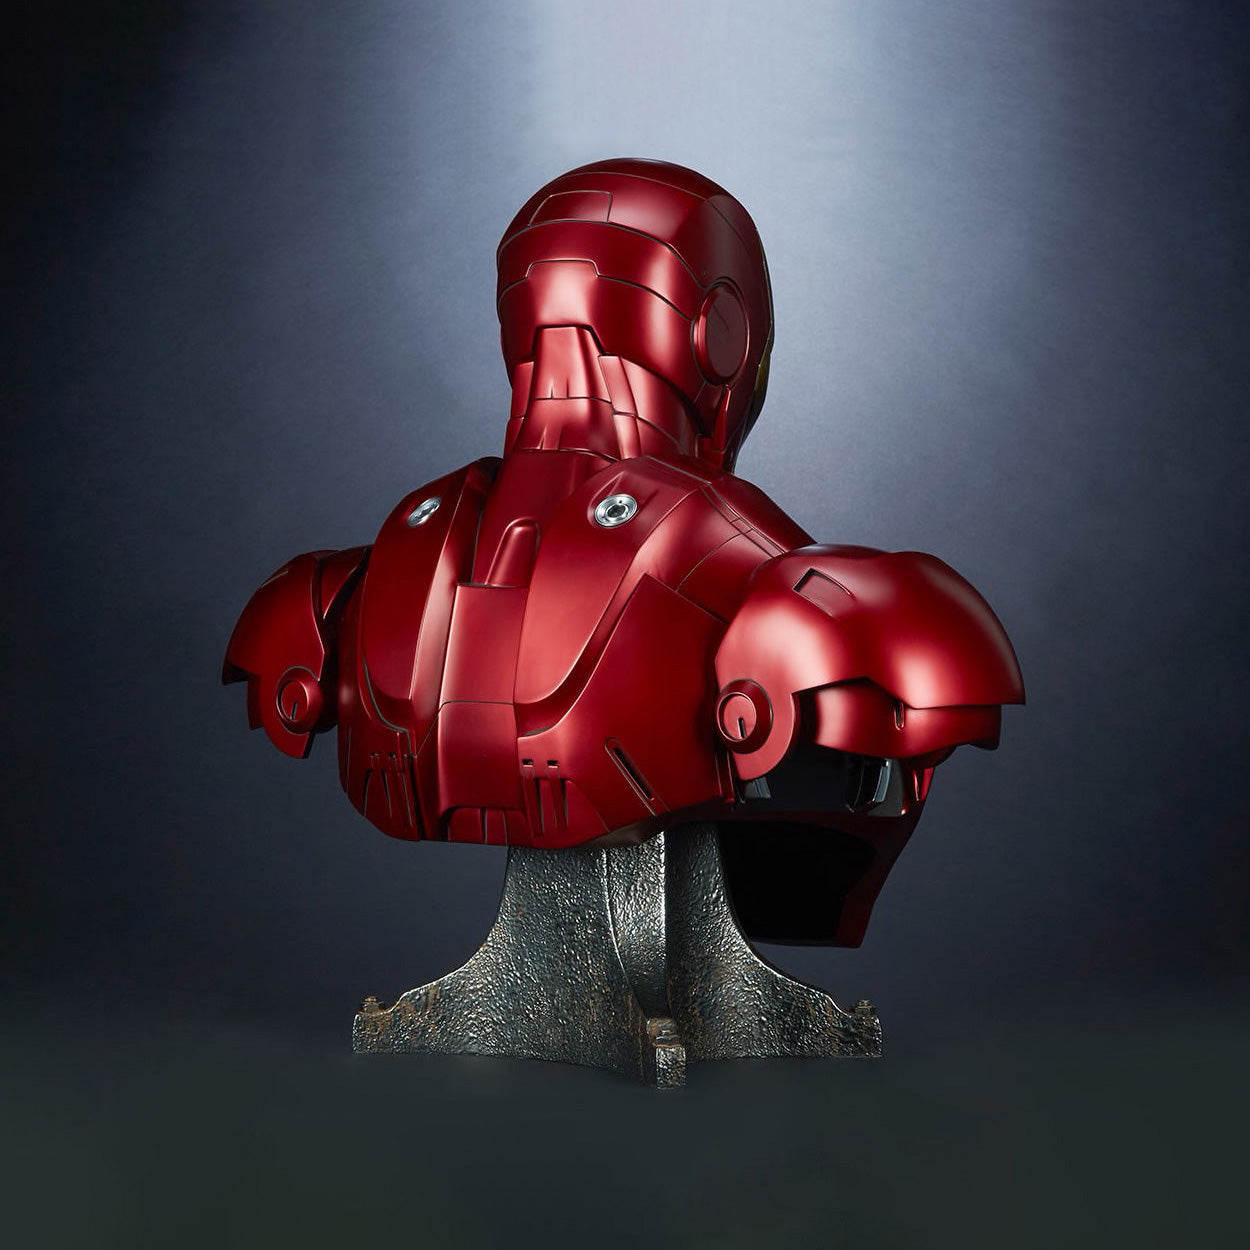 (IN STOCK) Sideshow Collectibles - Life-Size Bust - Marvel - Iron Man Mark III - Marvelous Toys